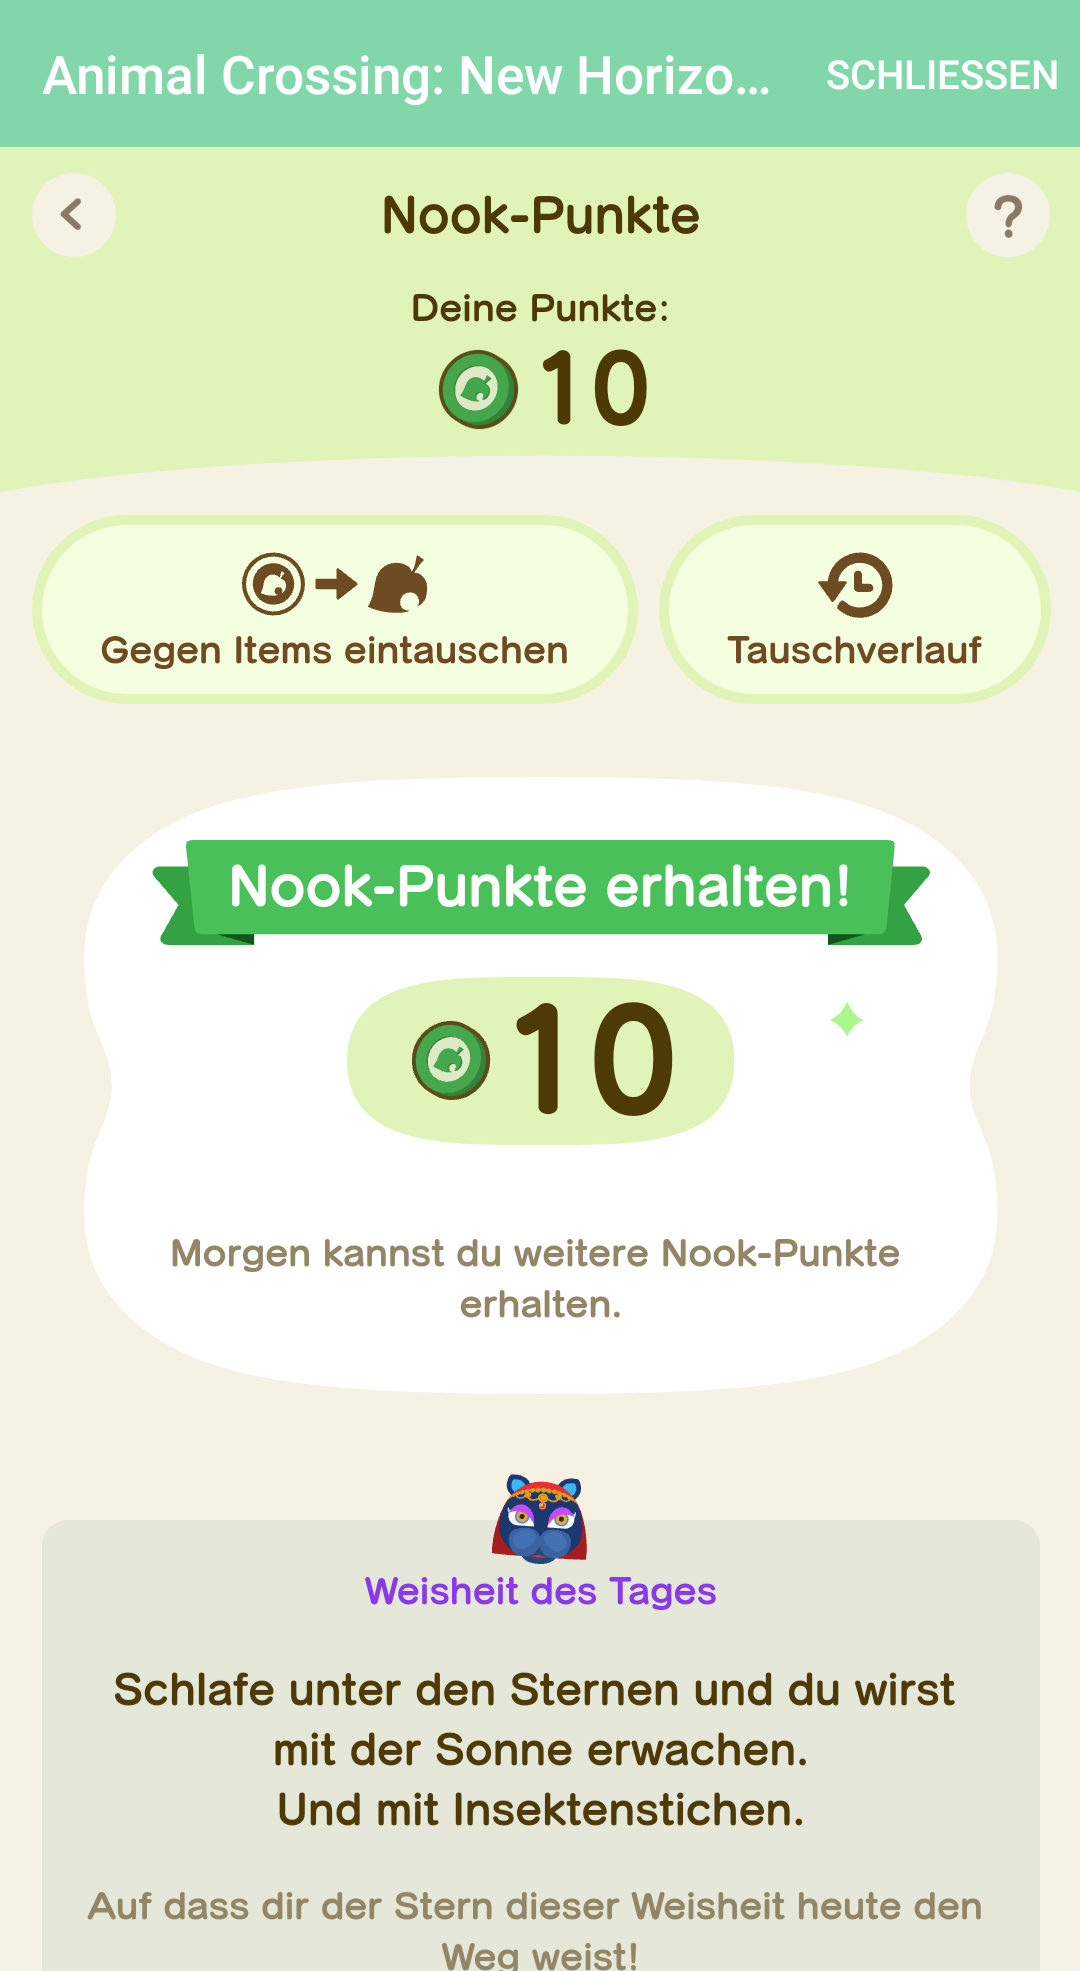 nook-punkte.png